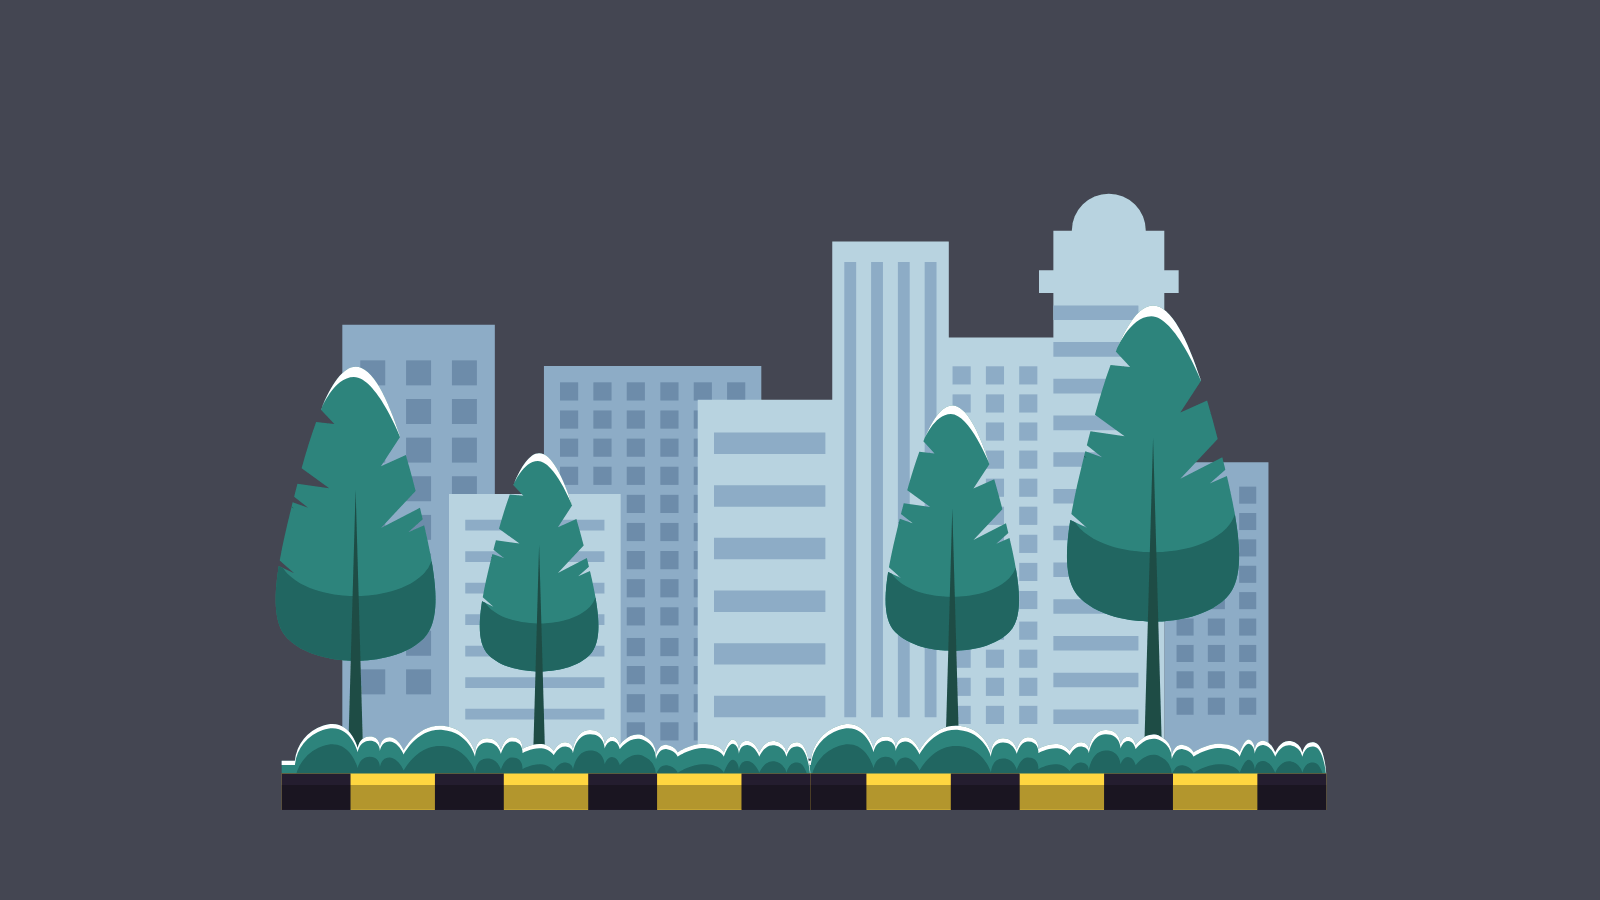 An illustration of a city street with trees lining the sidewalk